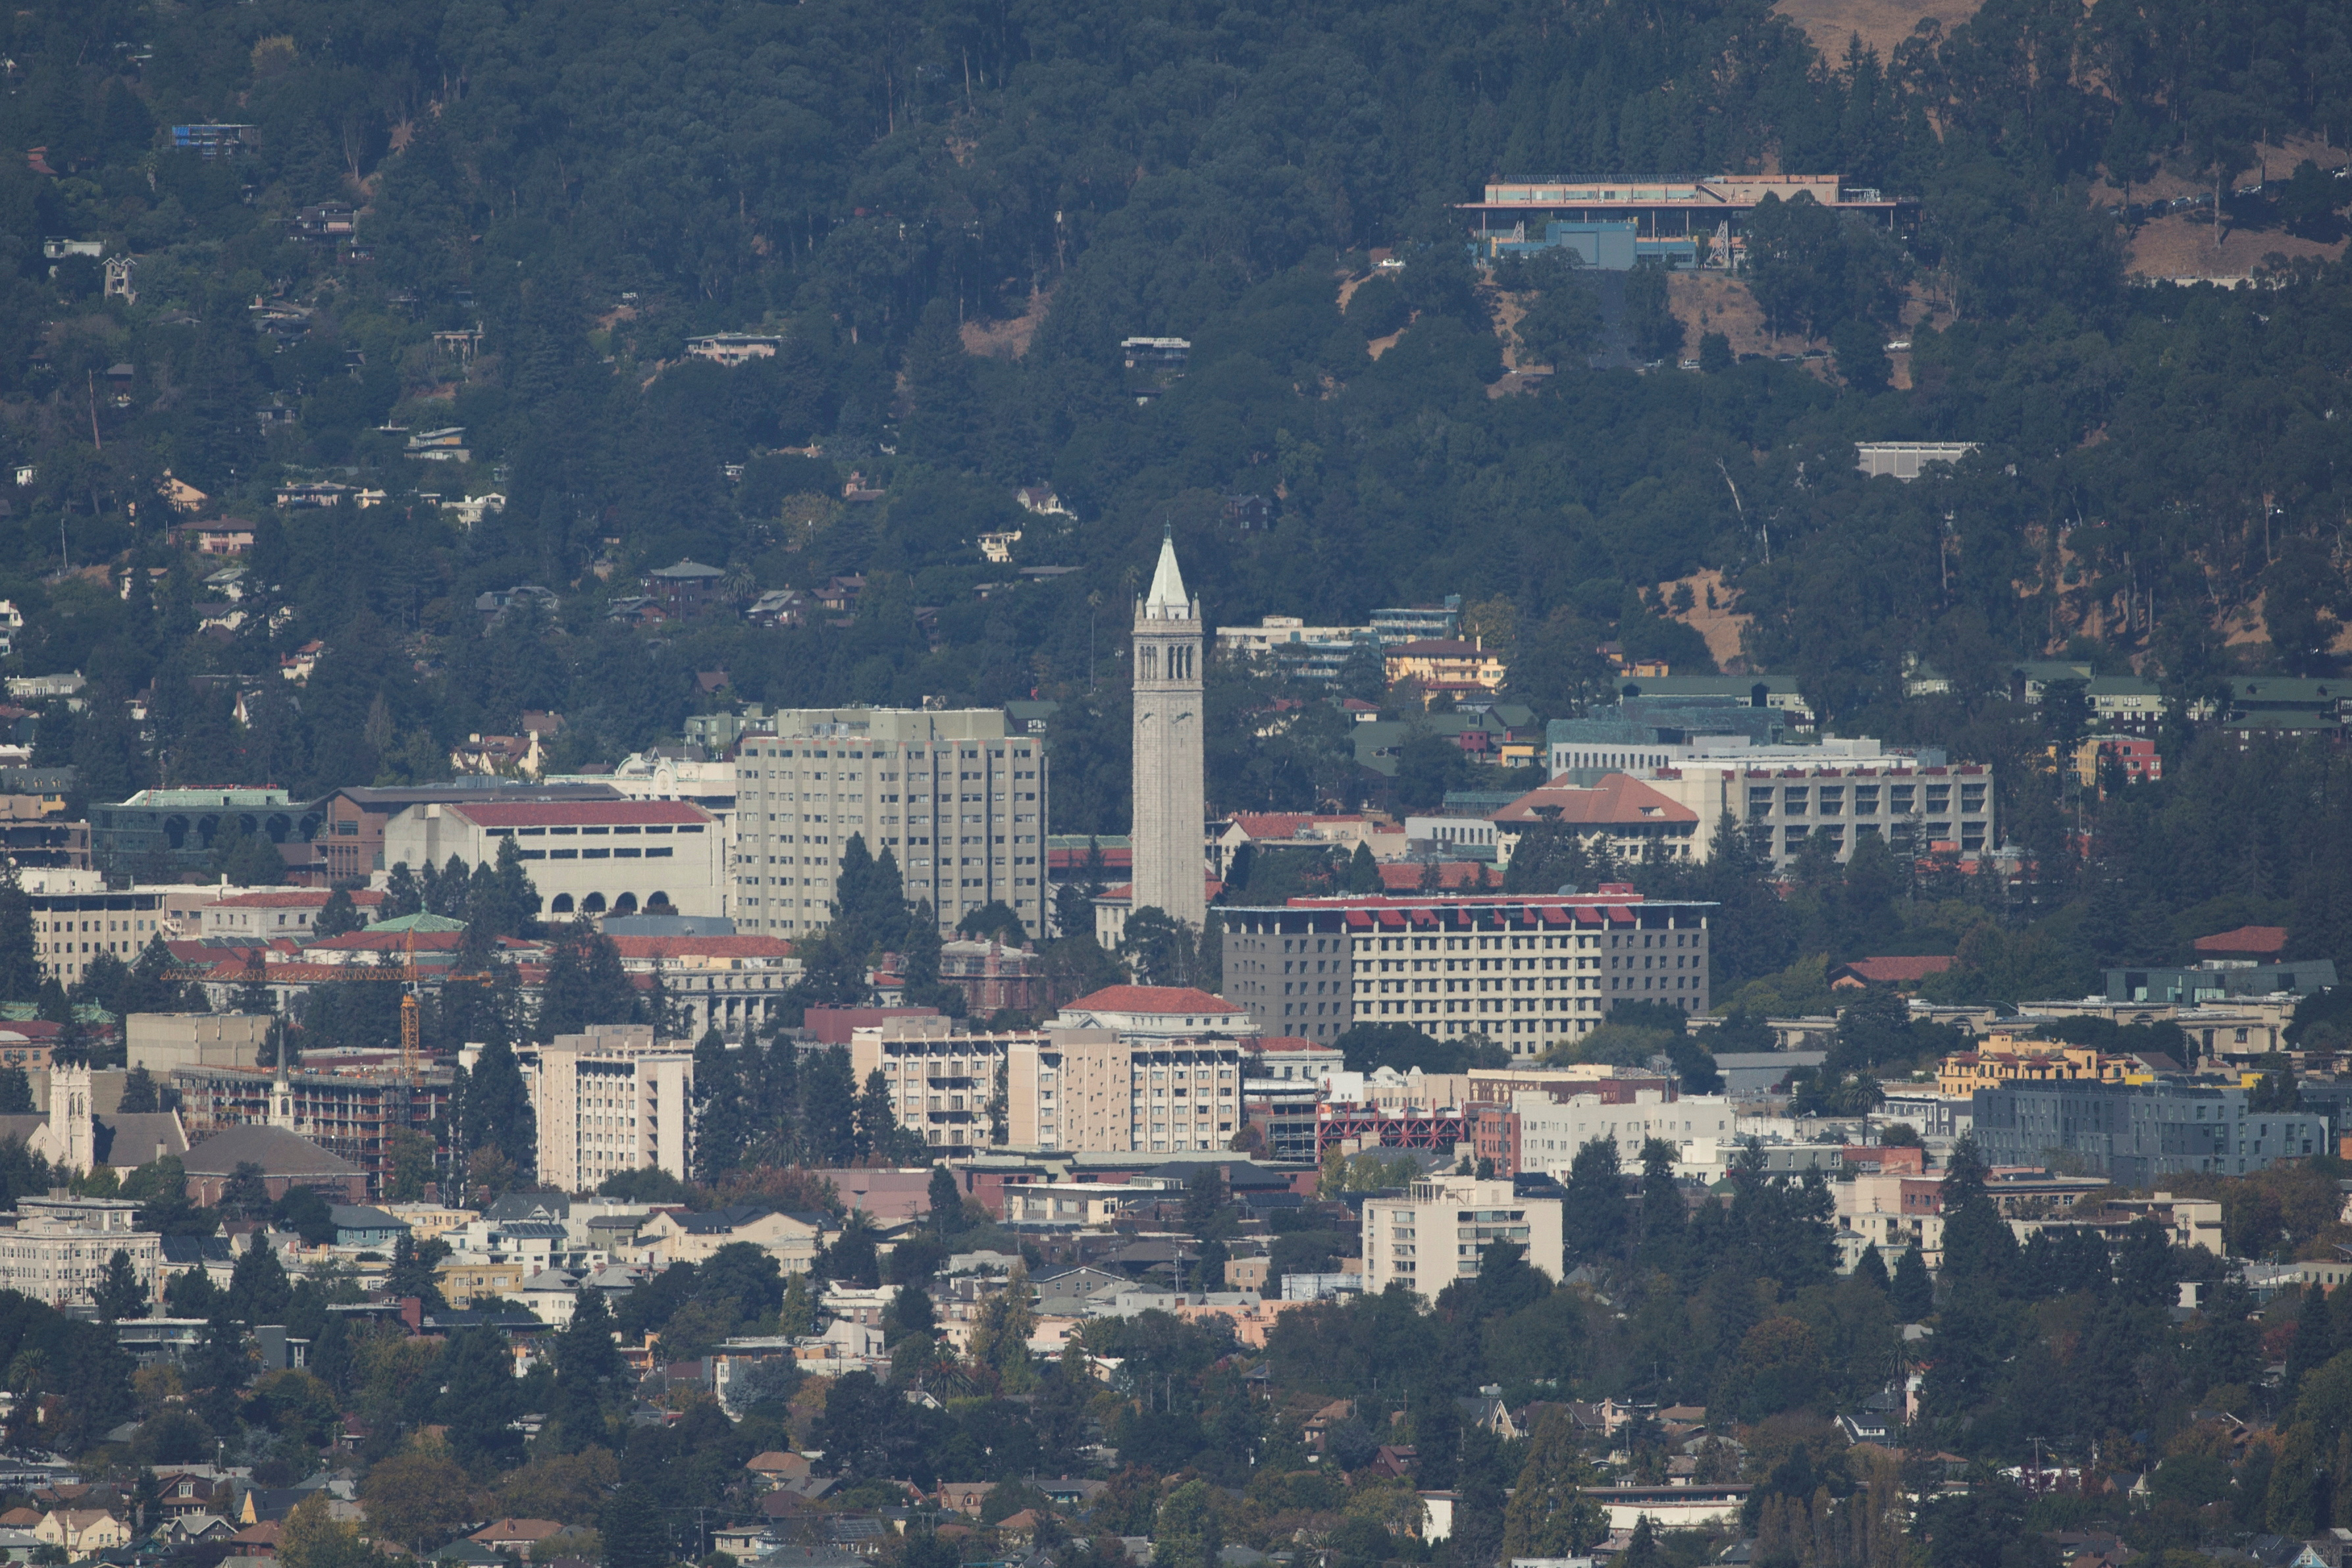 The Sather Tower at the University of California, Berkeley, is seen from Oakland, California